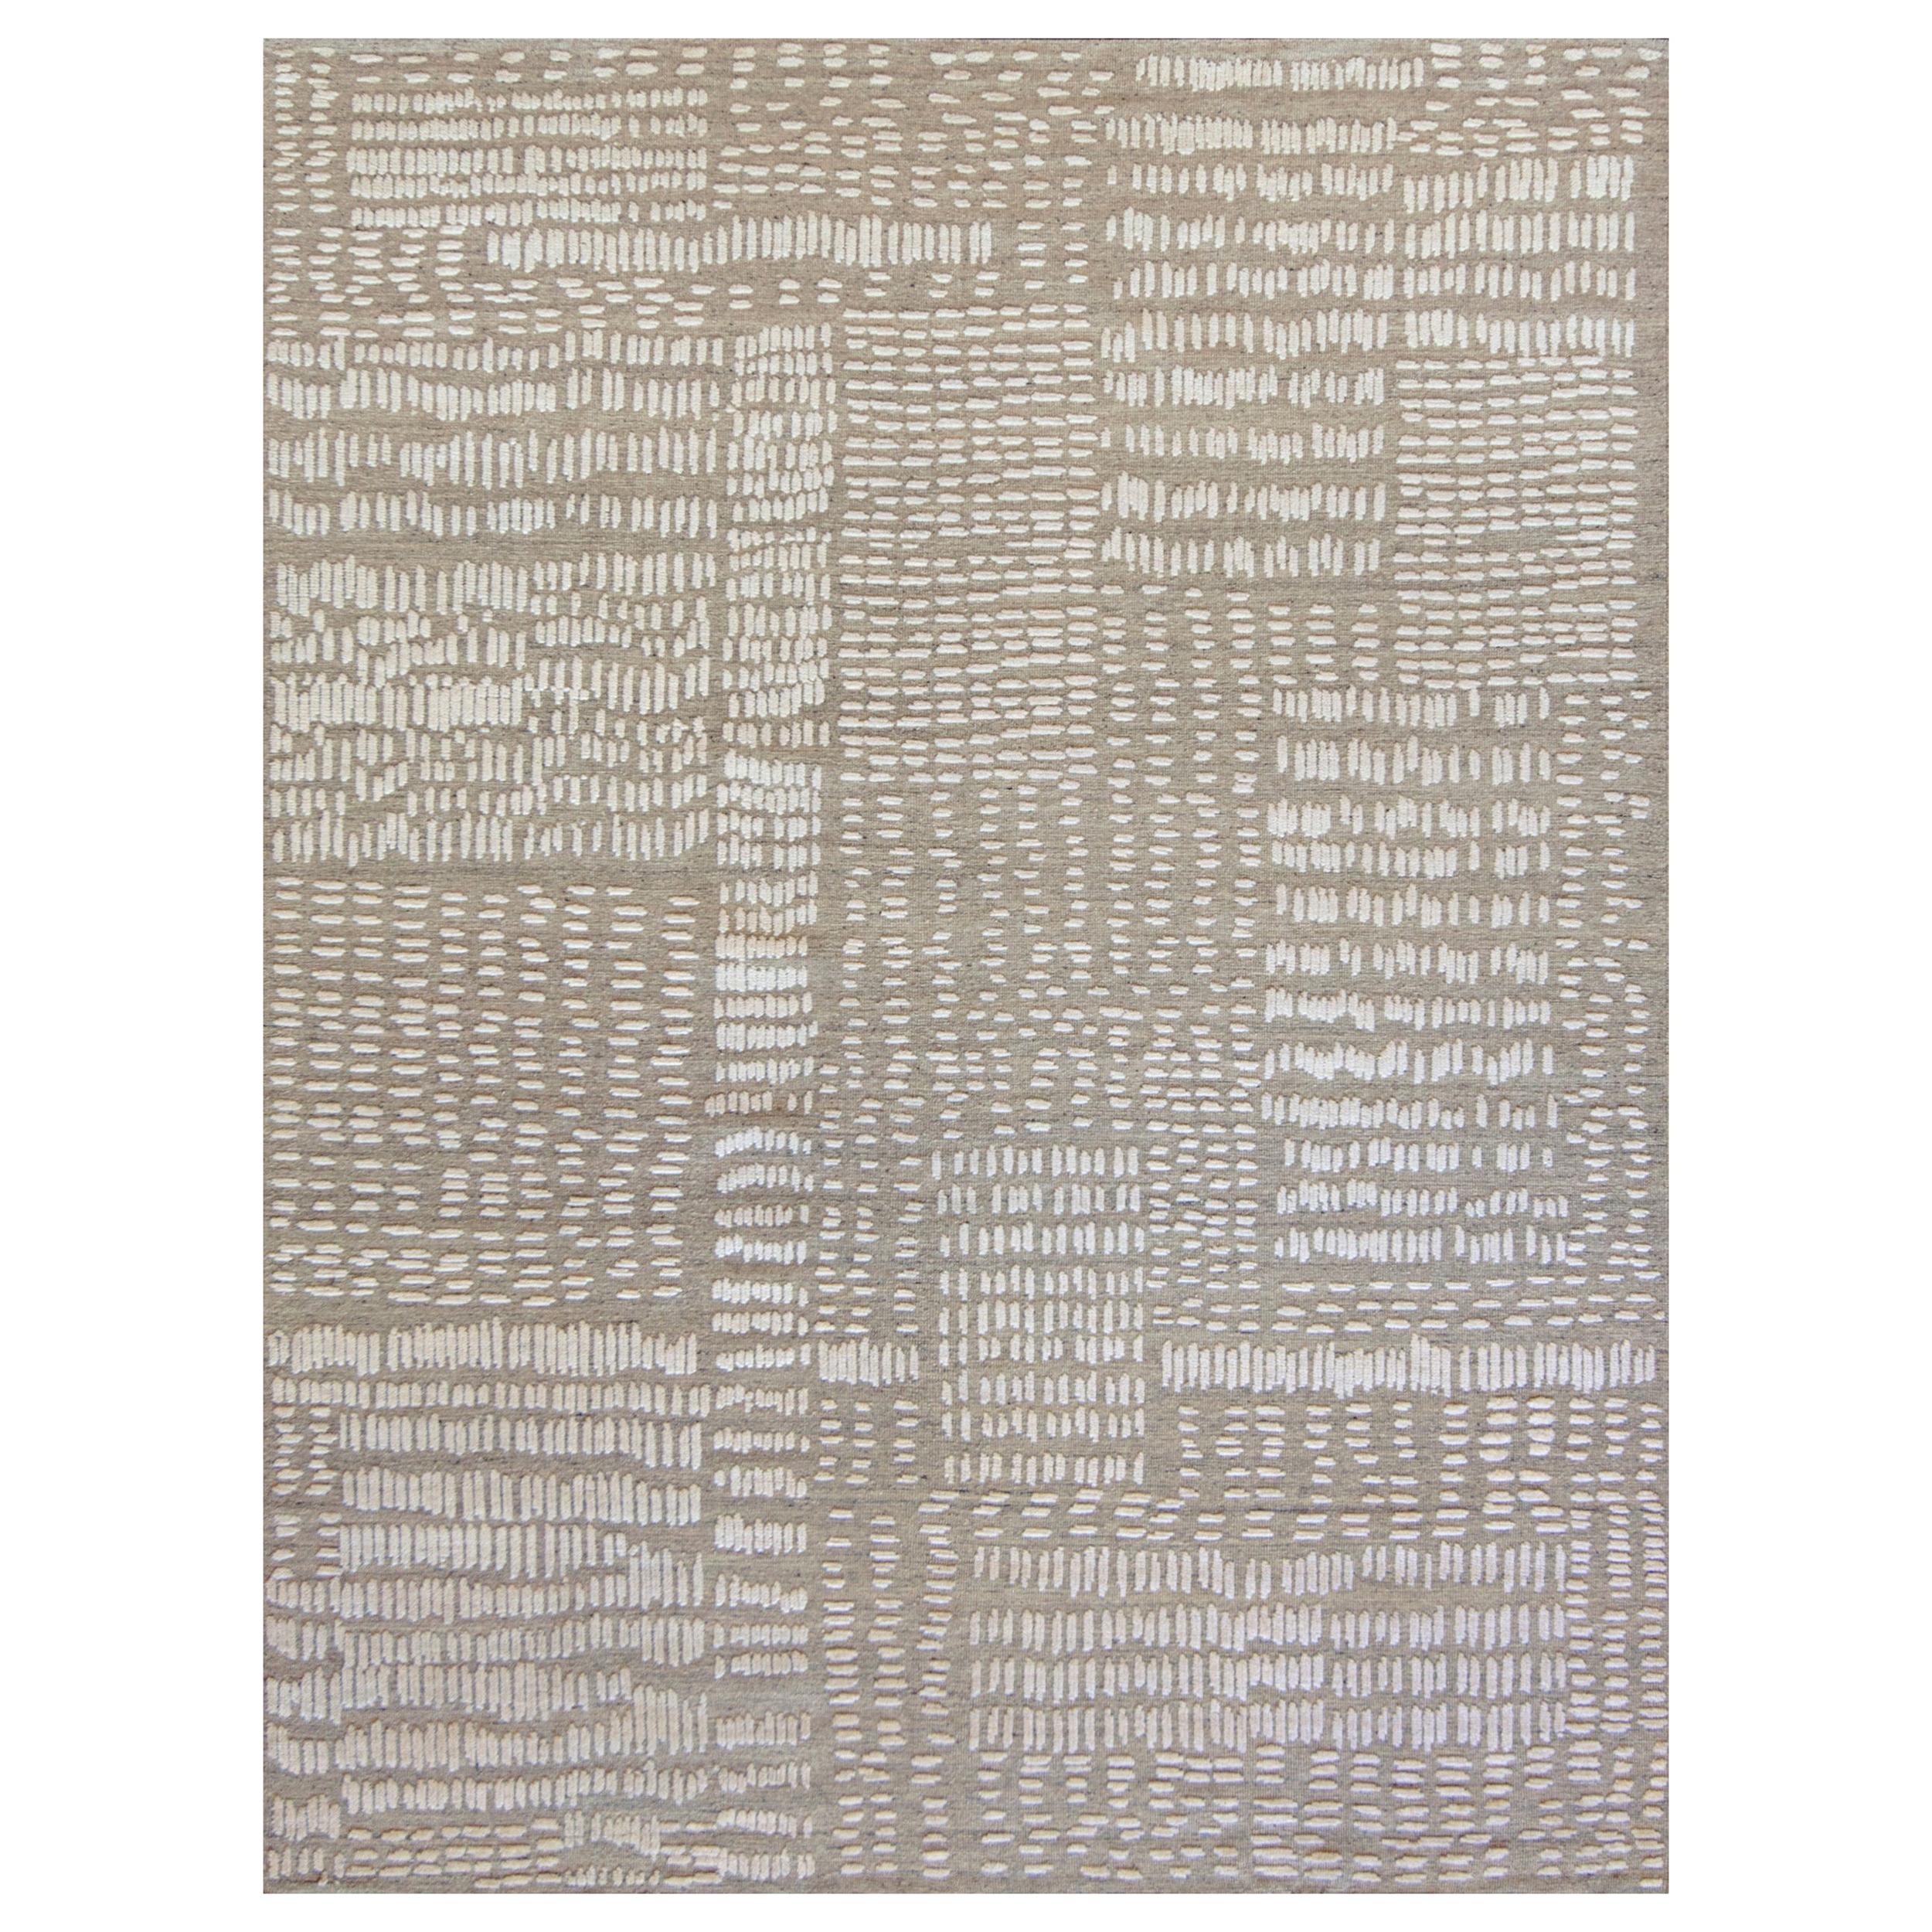 Mansour Modern Handwoven Moroccan Inspired Wool Rug